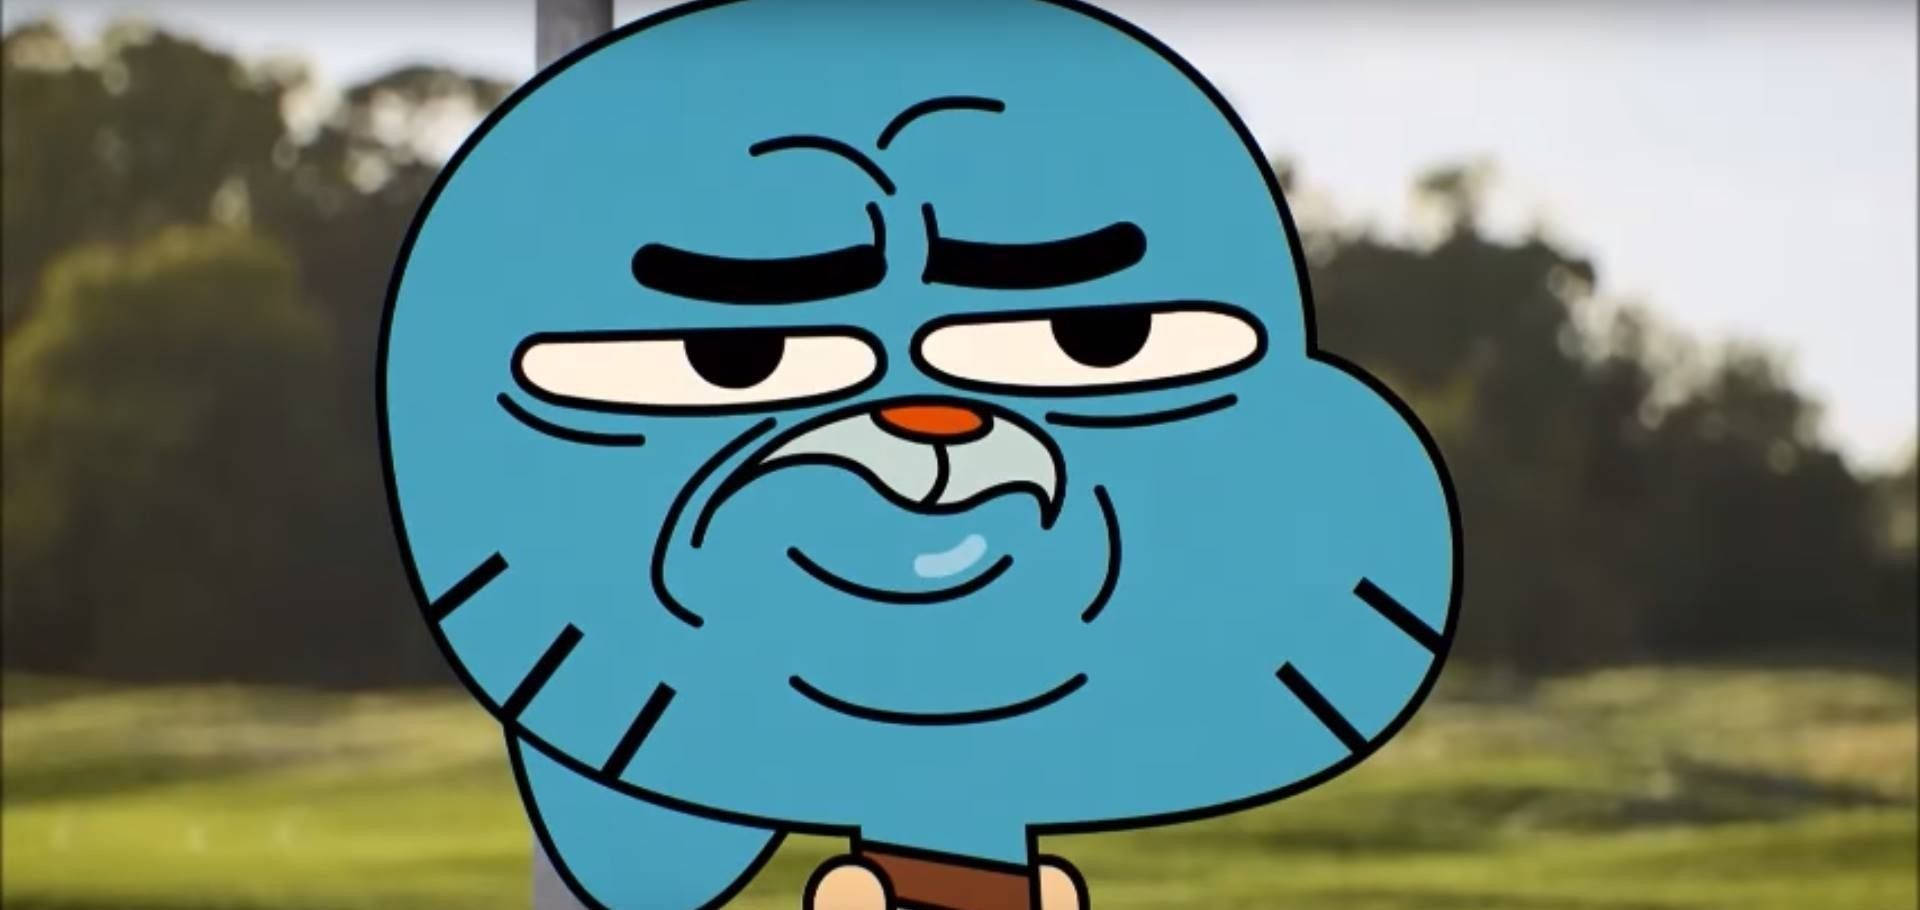 "Gumball making hilarious expressions" Wallpaper